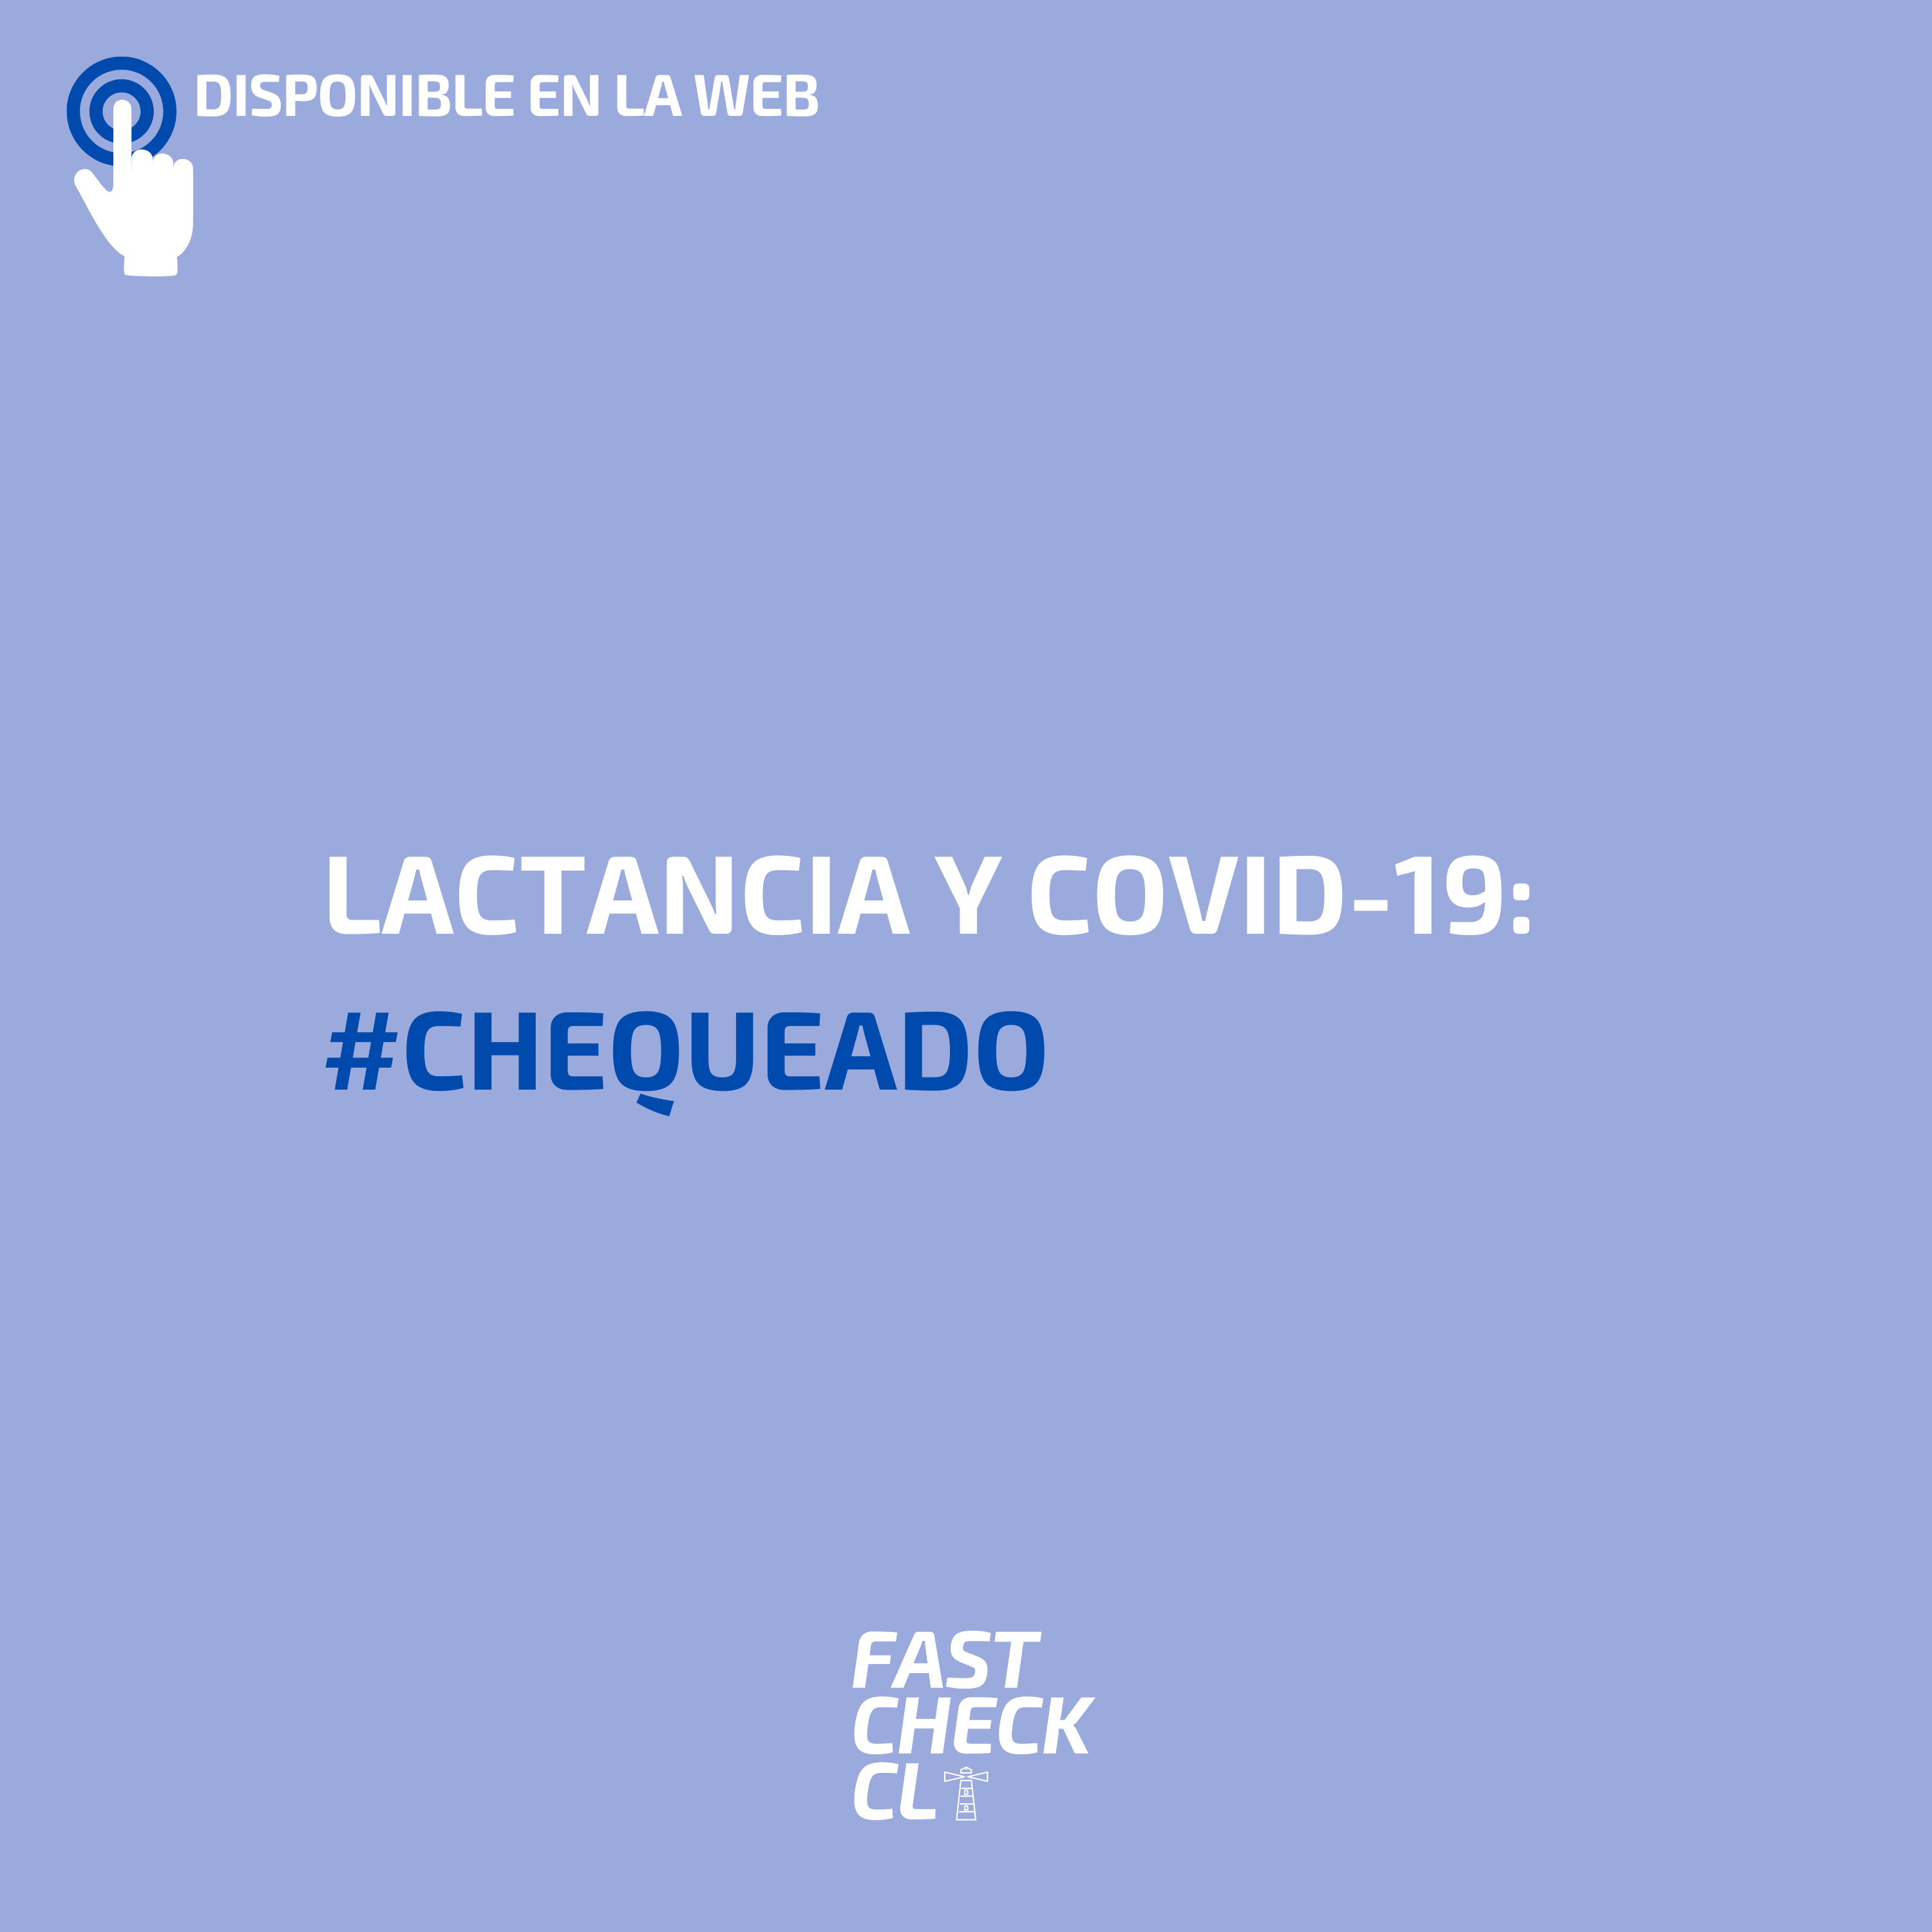 You are currently viewing Lactancia y Covid-19: #Chequeado